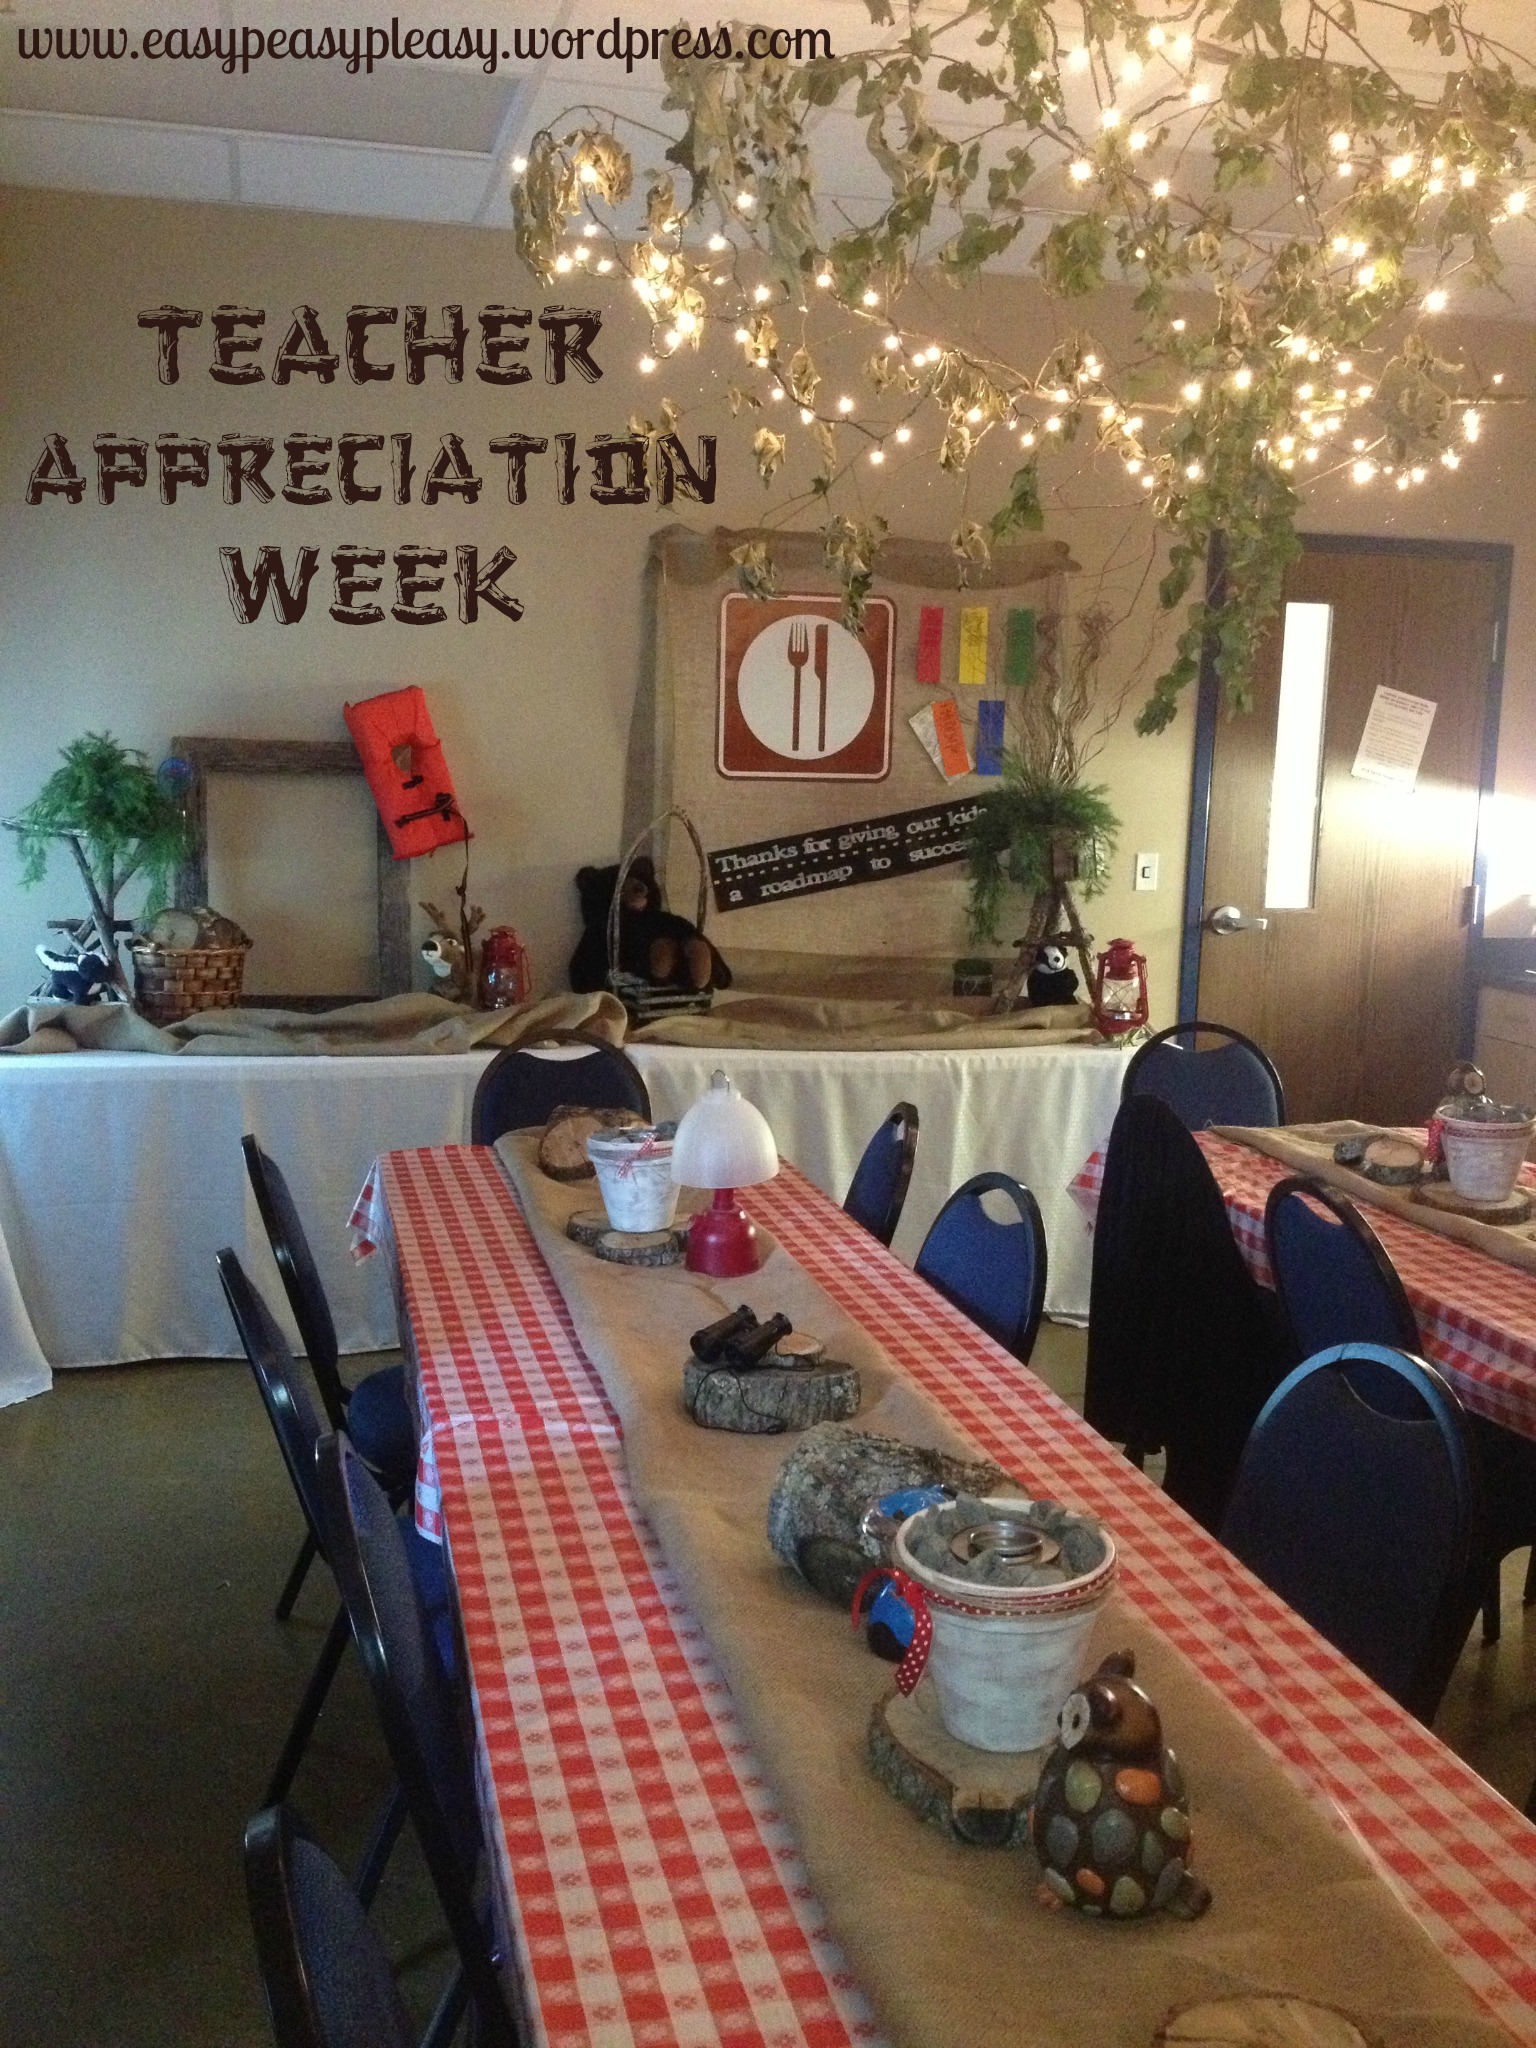 Teacher Appreciation Week Camping Theme tables and buffet tables